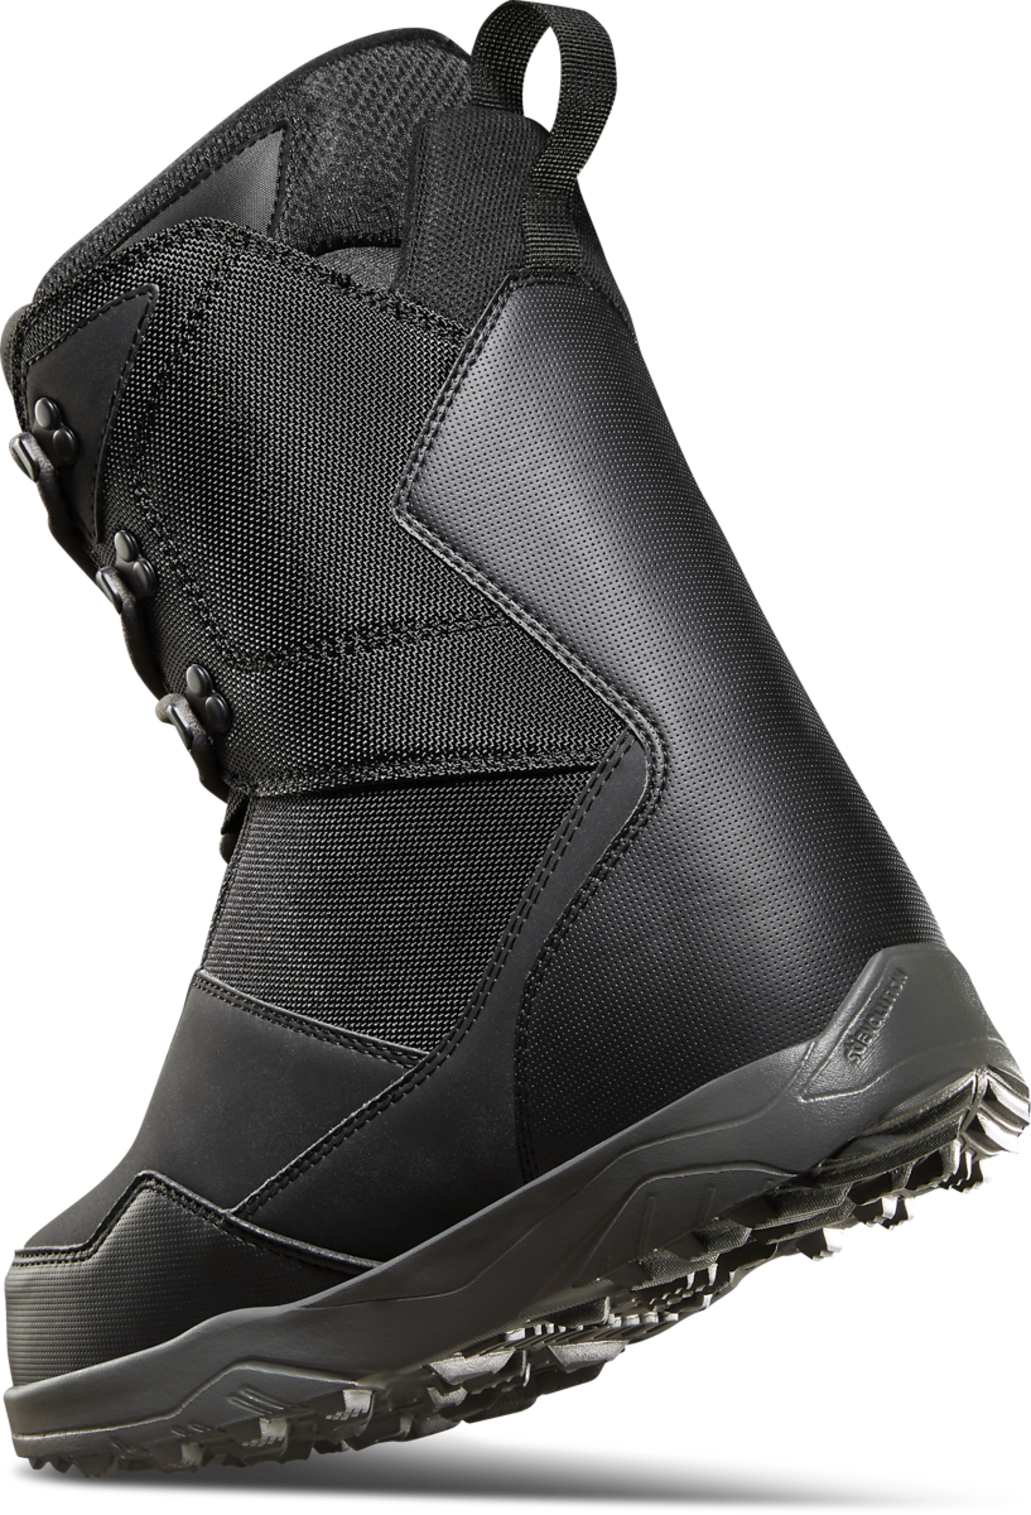 Thirtytwo Men's Shifty '22 Black Snow Boots